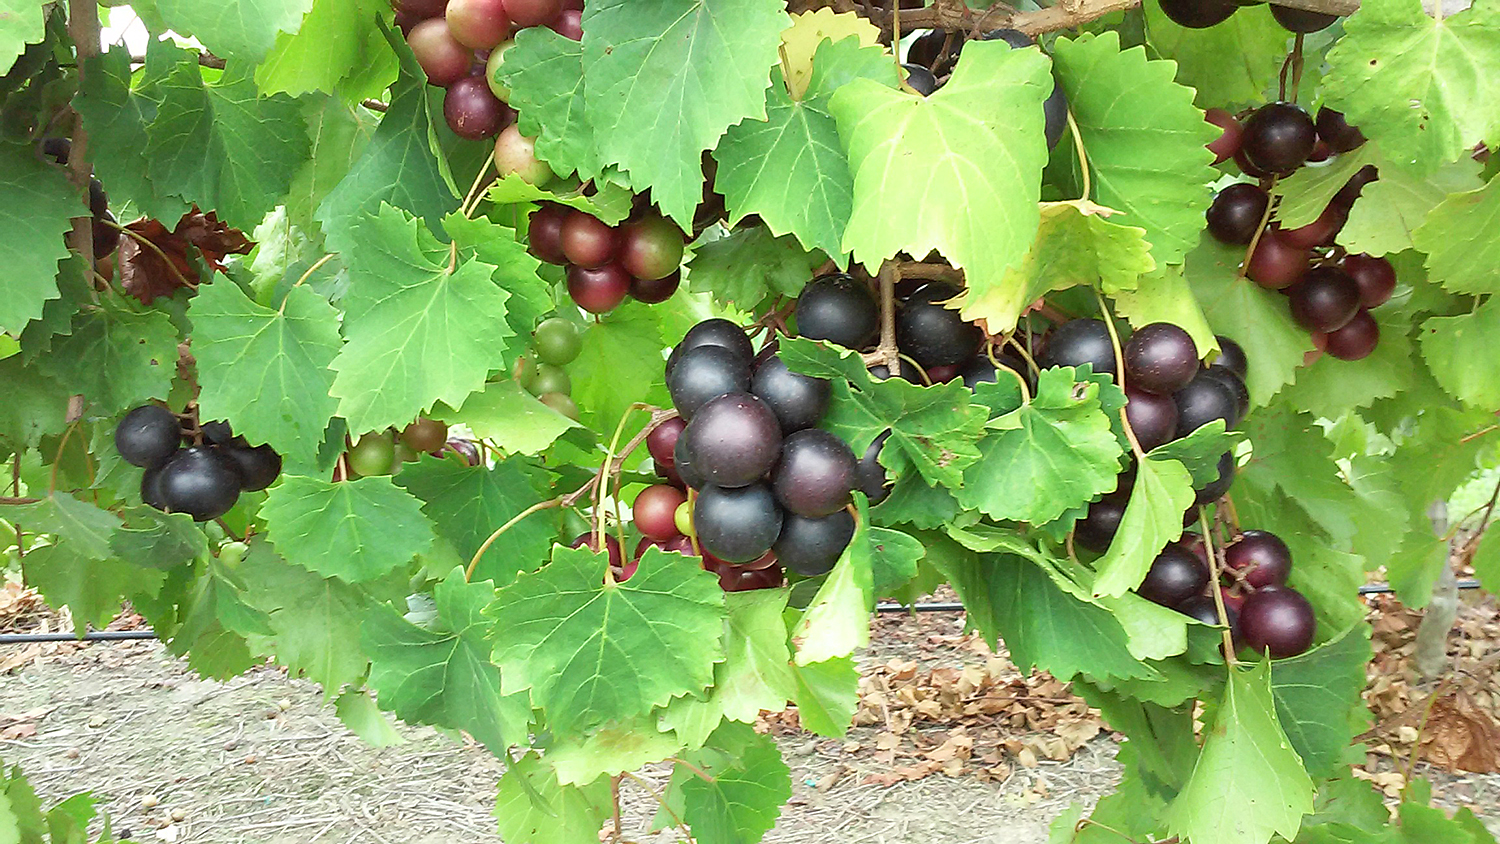 Photo of muscadine grapes on the vine.